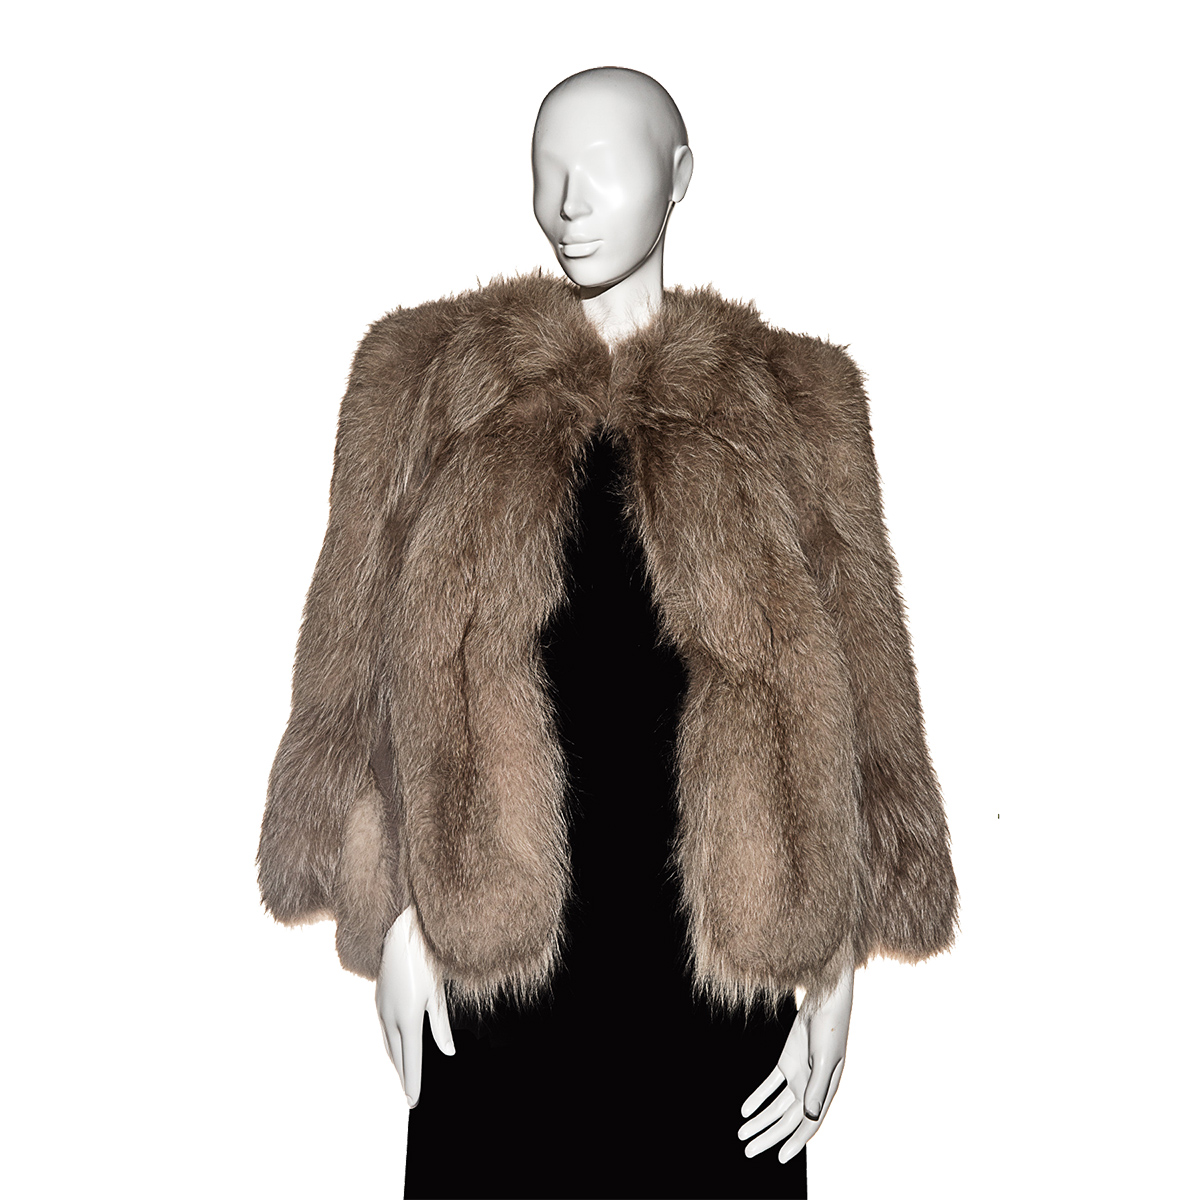 Read more about the article OBJECT HISTORY: Fromm Fox Fur Coat